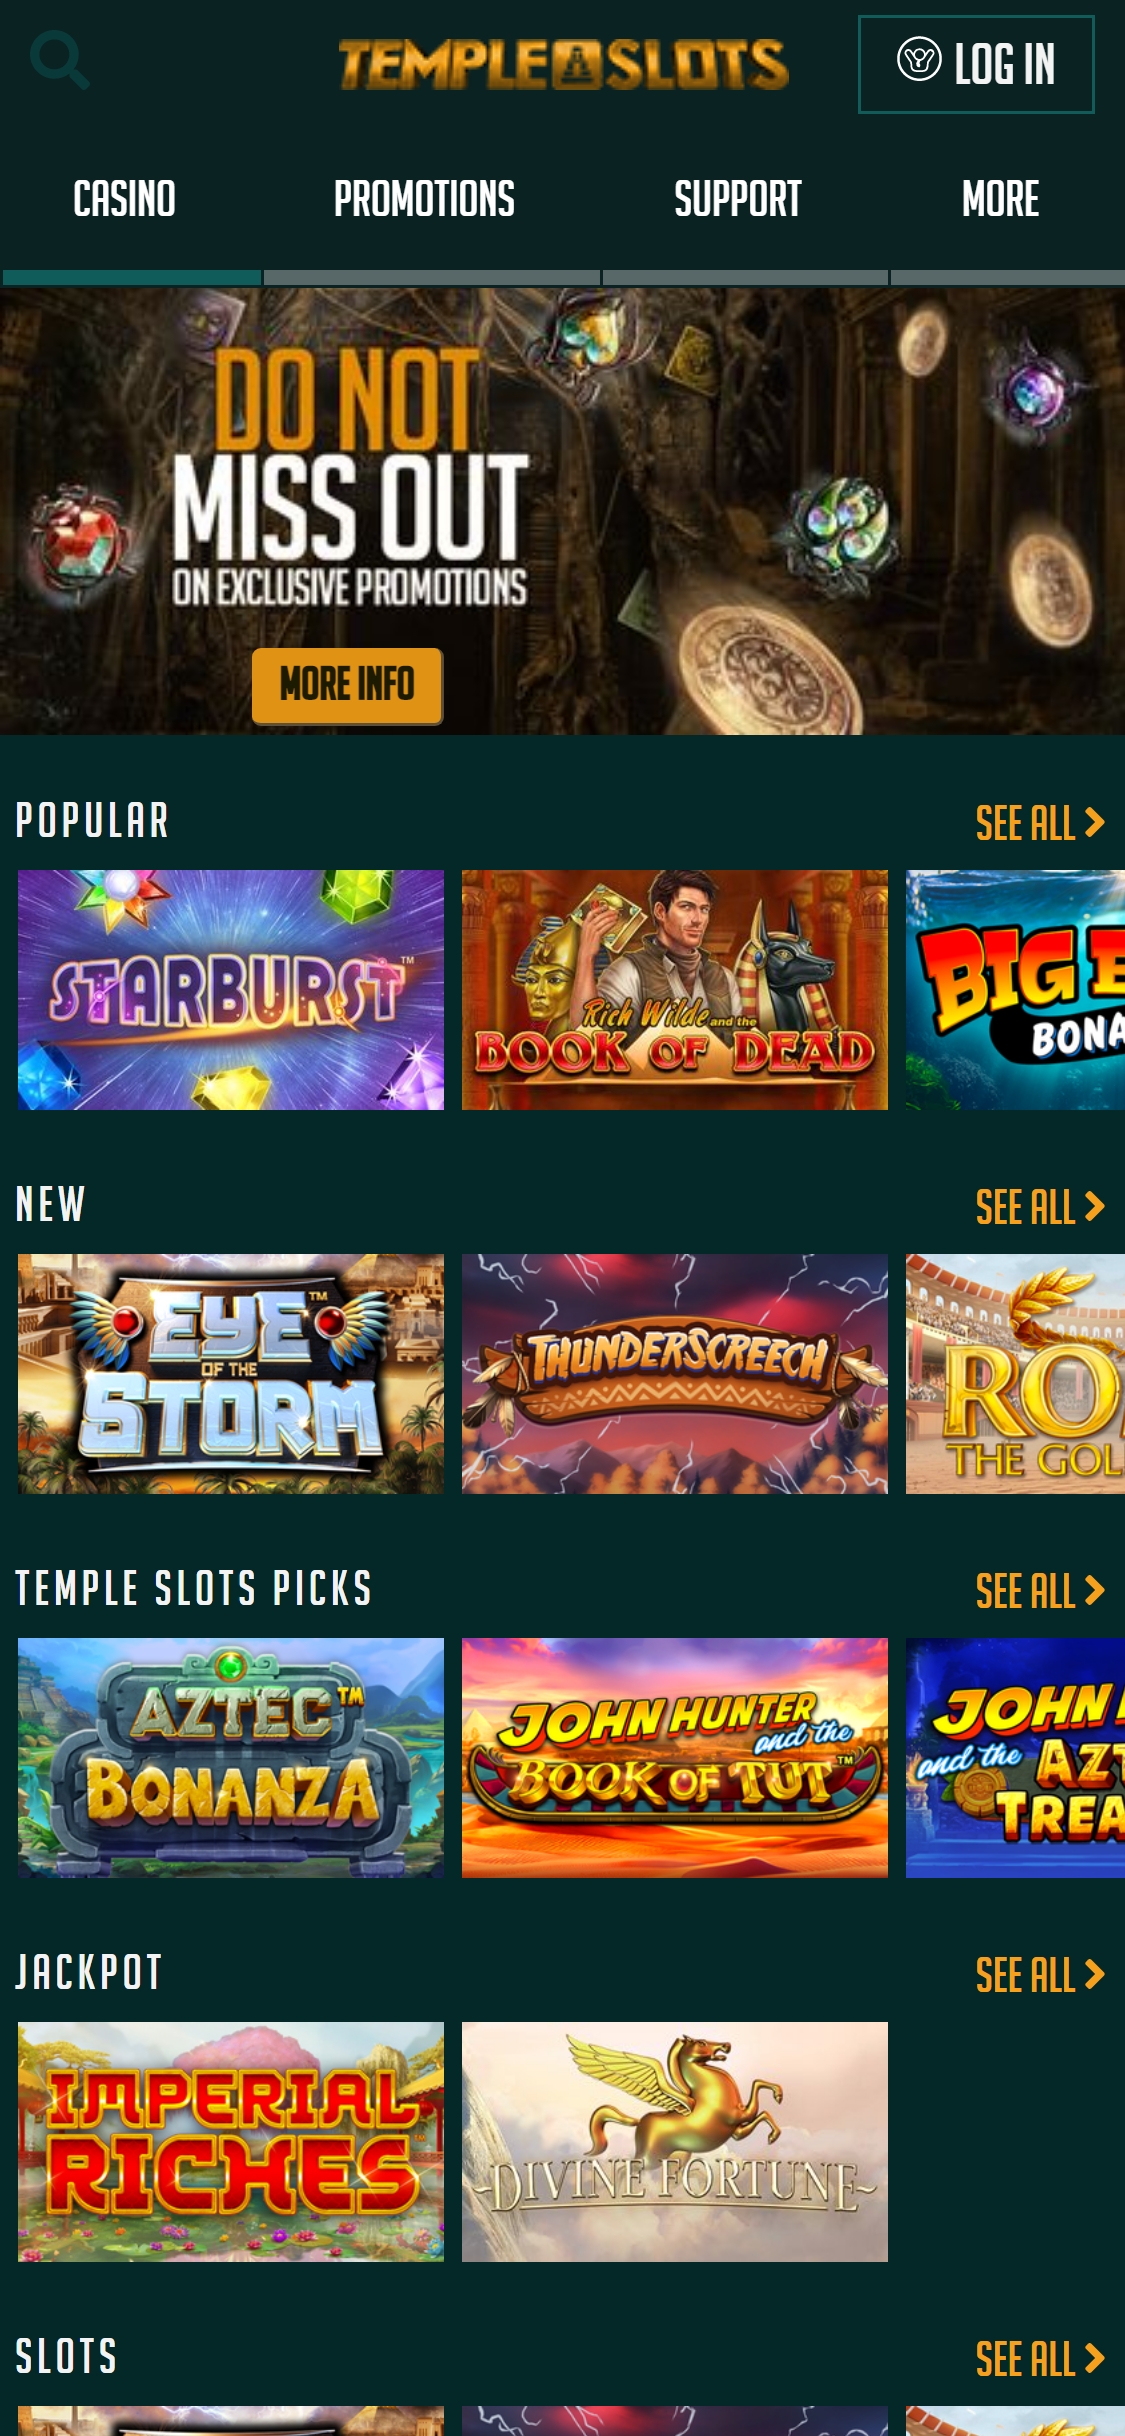 Temple Slots Casino Mobile Review